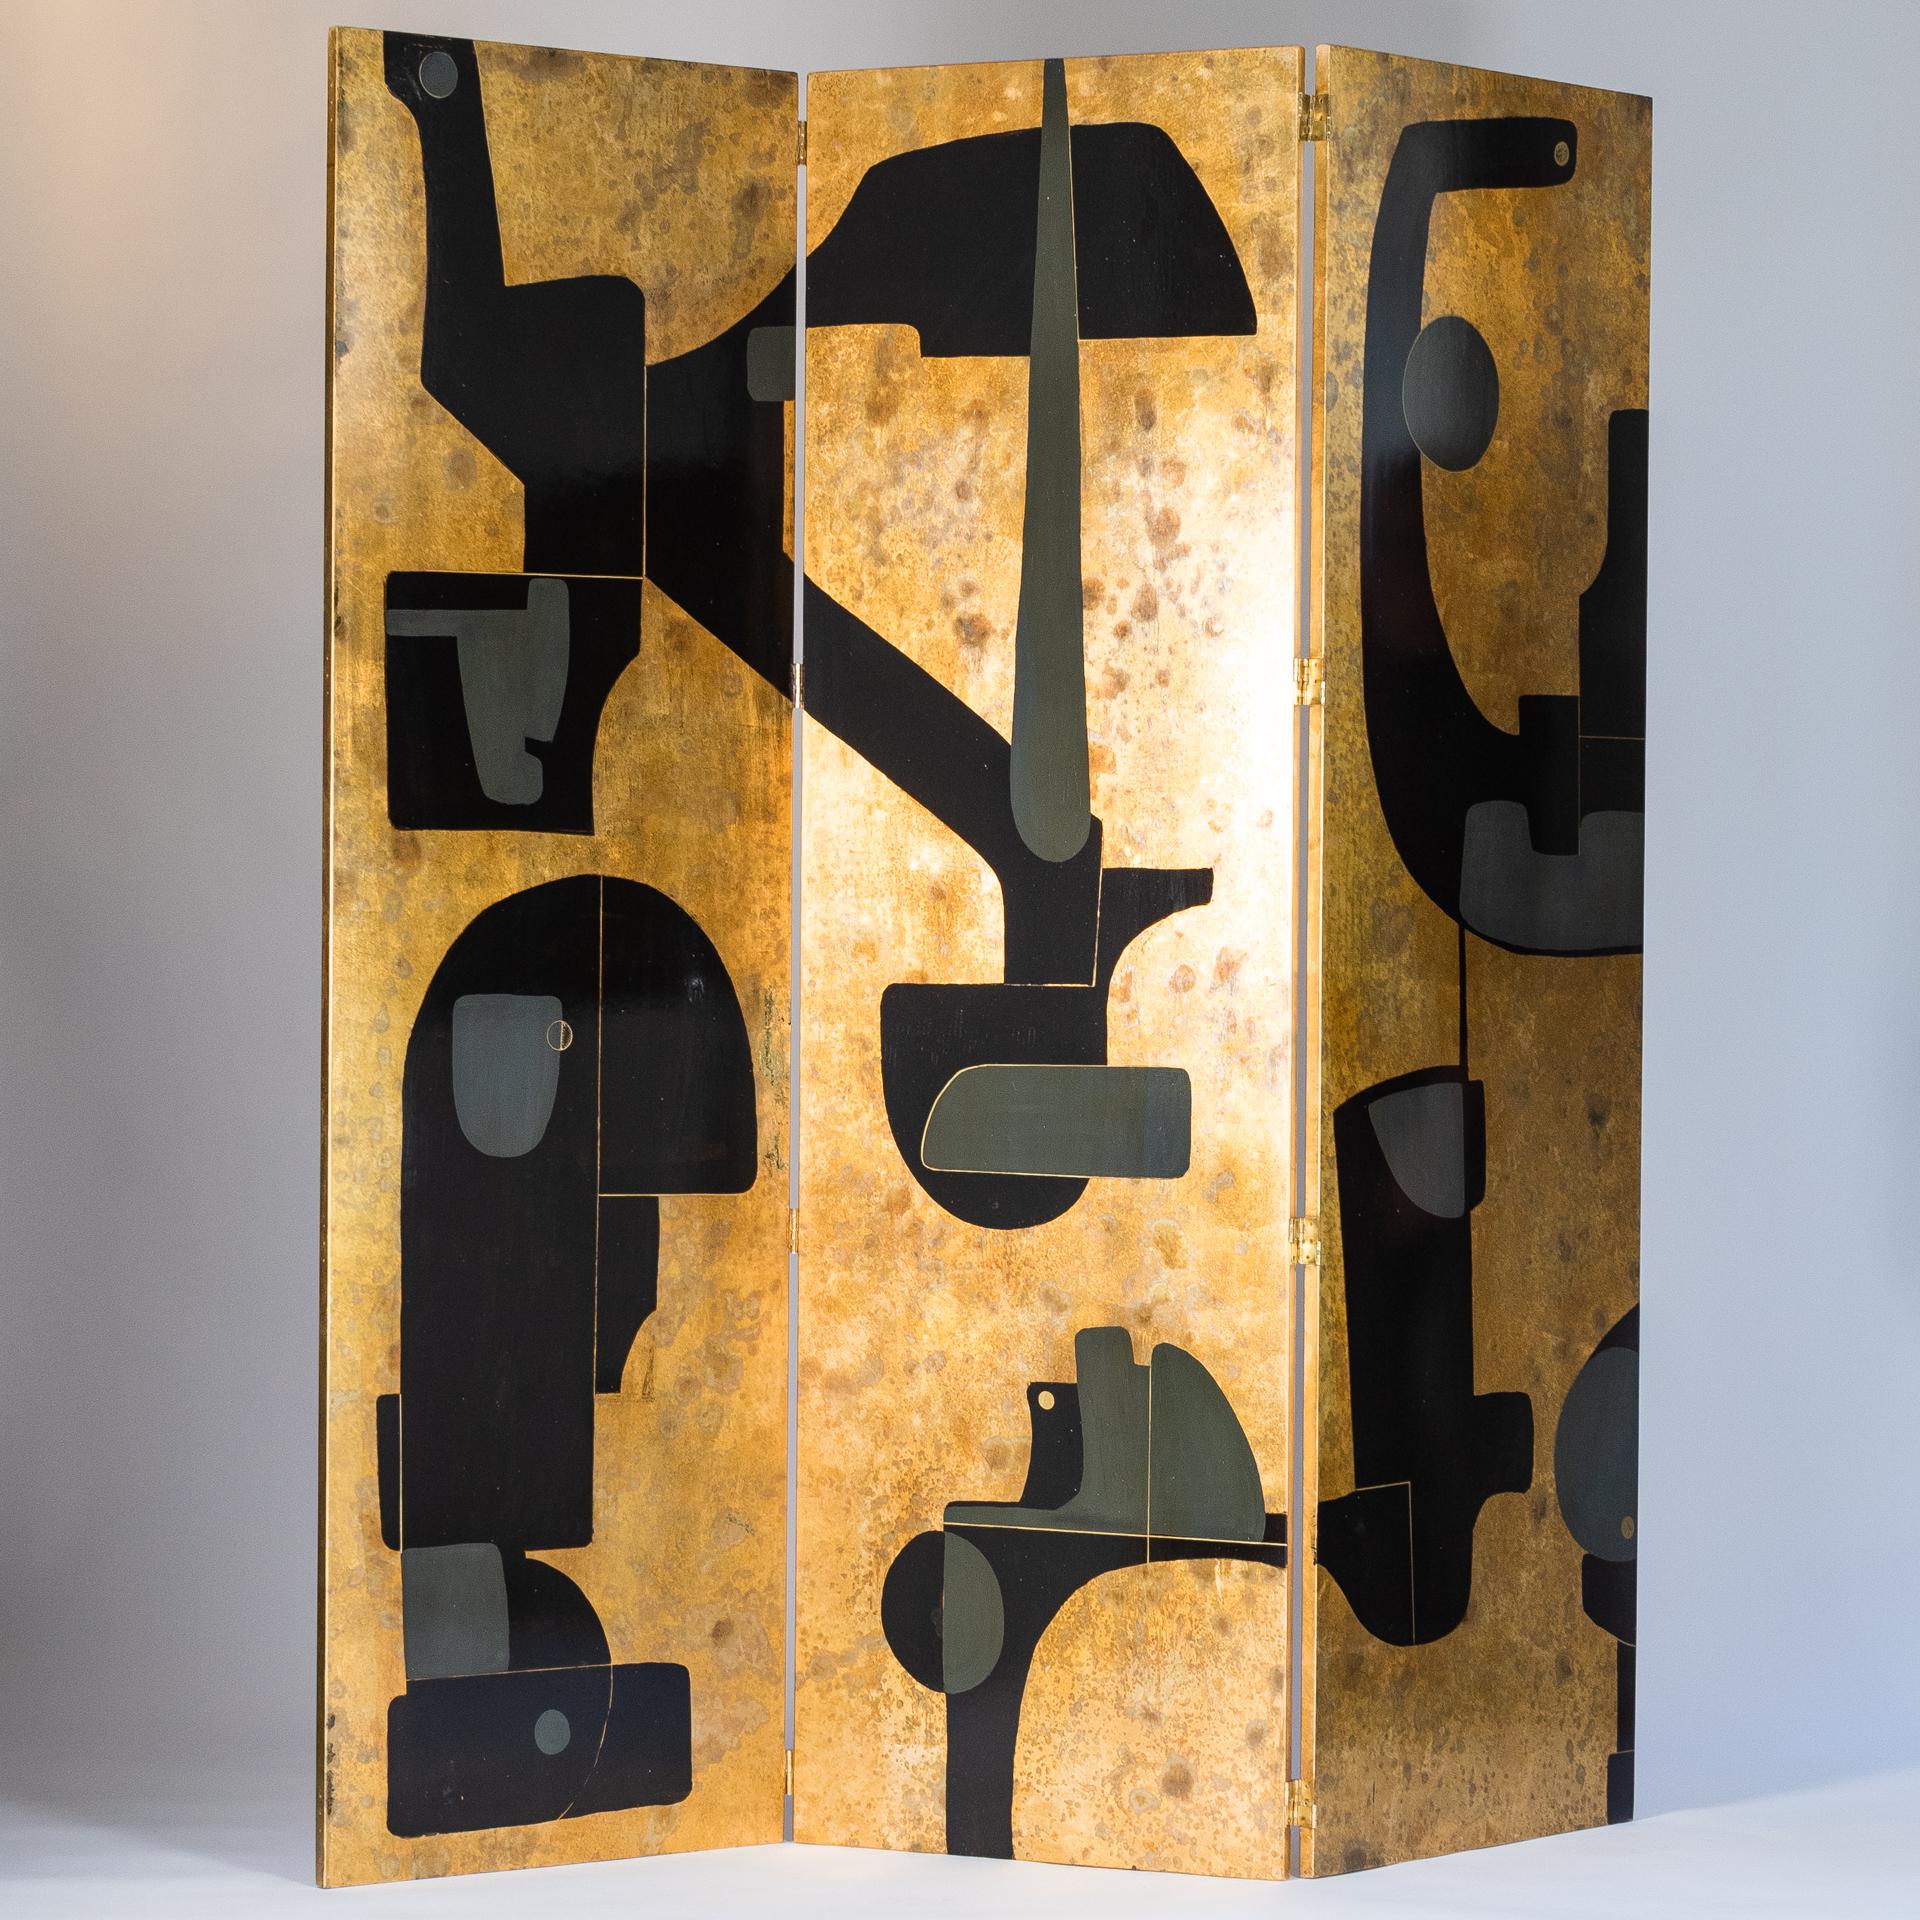 Expressive, Italian screen in the colors gold - gray and black by Stefano Pertini from the 1980s.
Backside gold plain with slightly pigmented structure, signed by hand S. Pertini
3 wooden panels covered with wallpaper and painted with acrylic